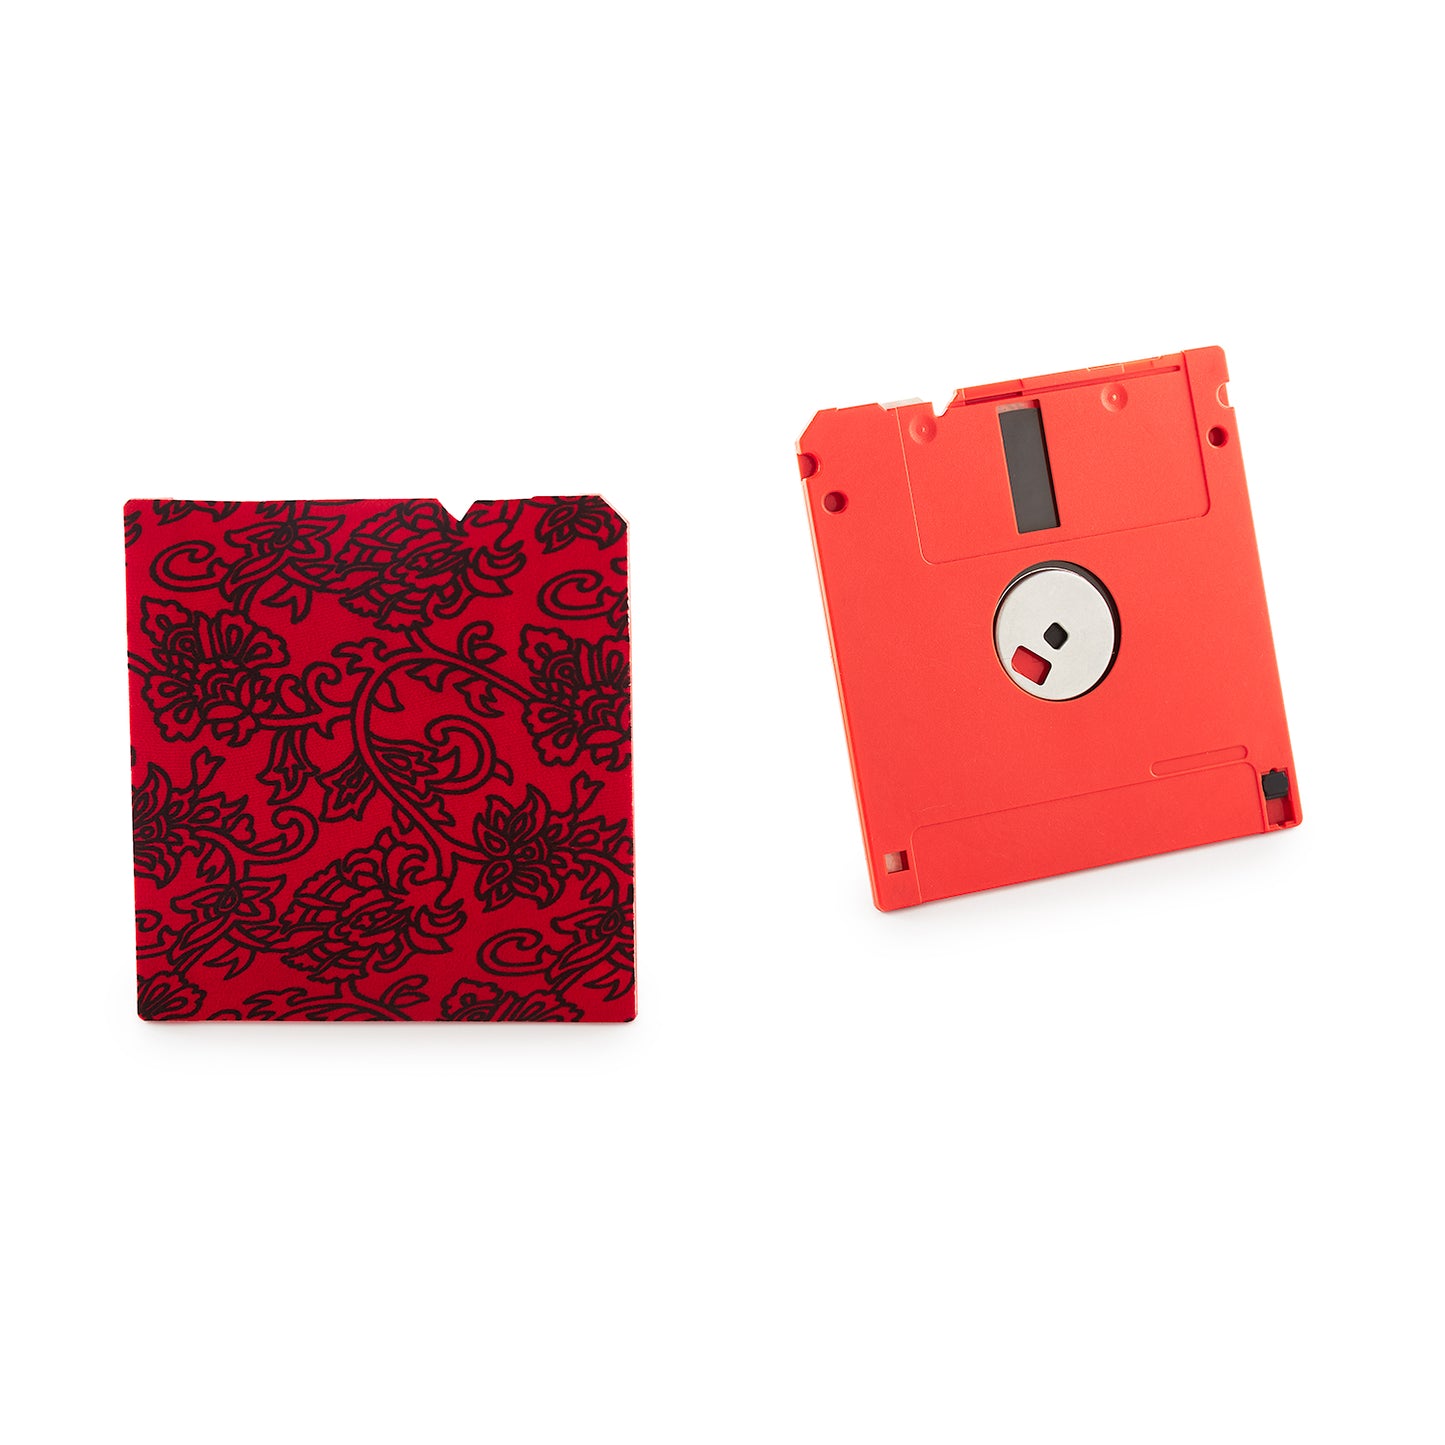 Berry Red - Floppy Disk Coaster Set of 2